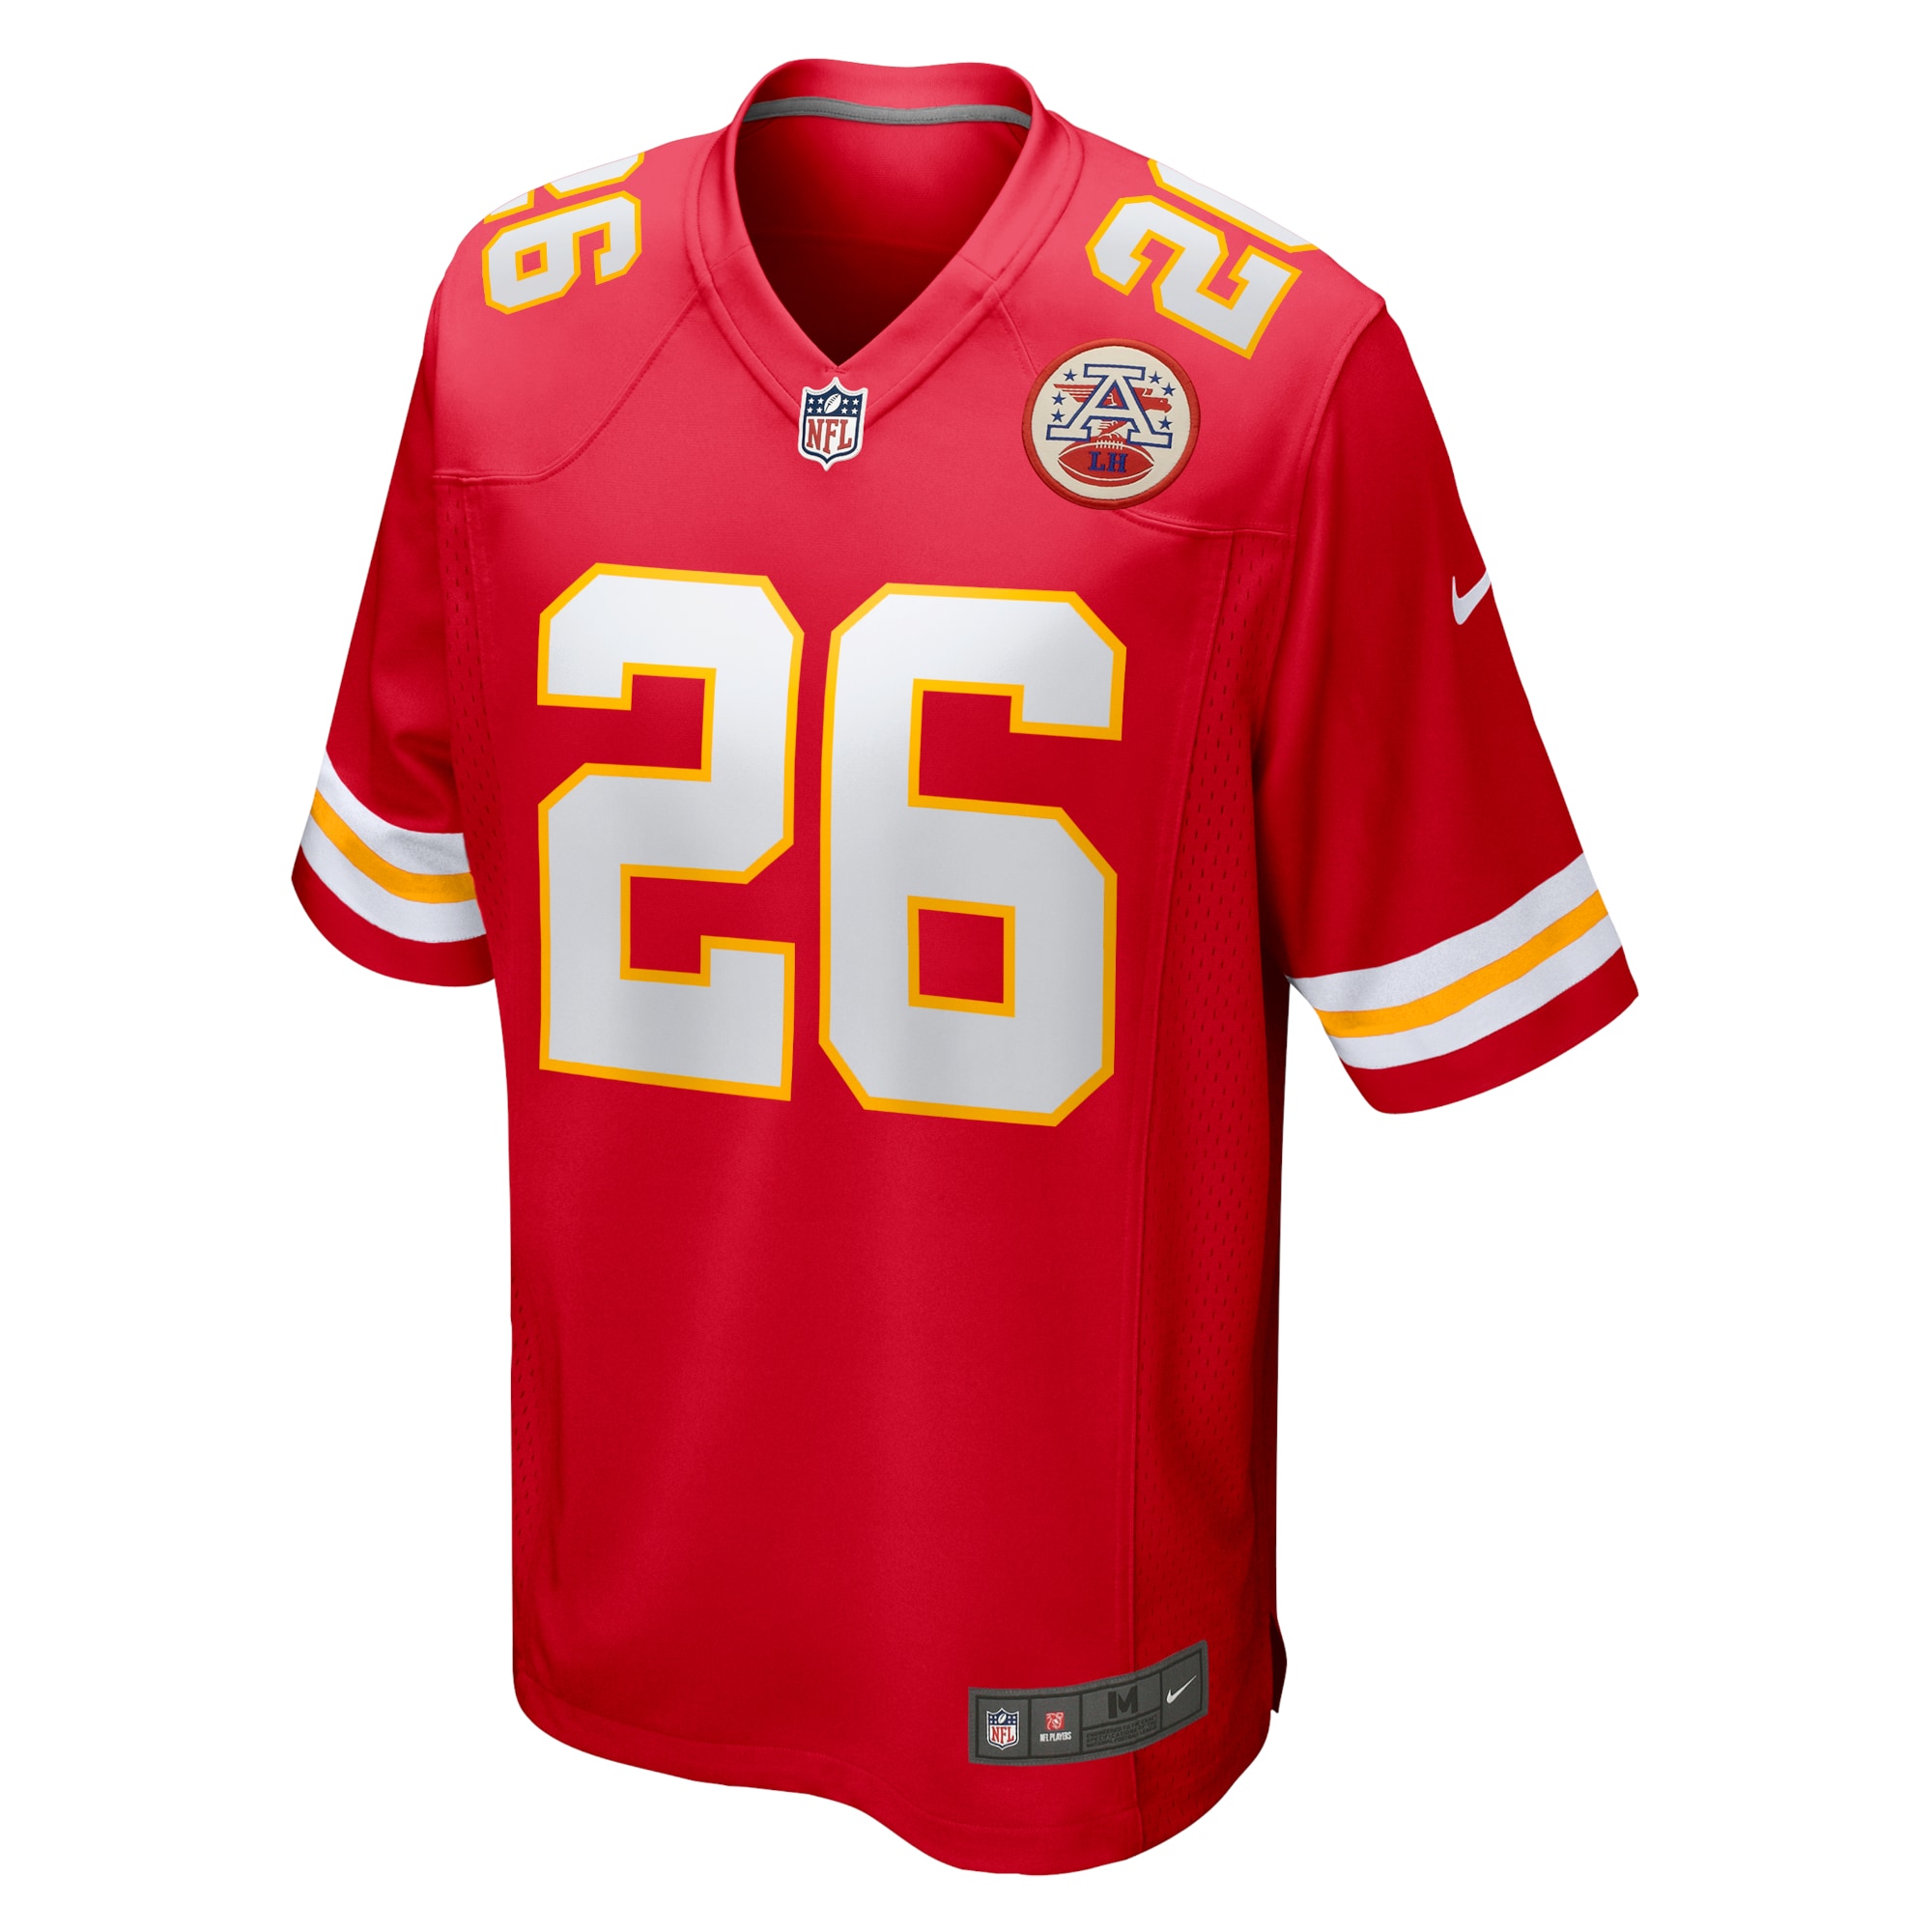 Men's Kansas City Chiefs Jerseys Red Le'Veon Bell Game Player Style